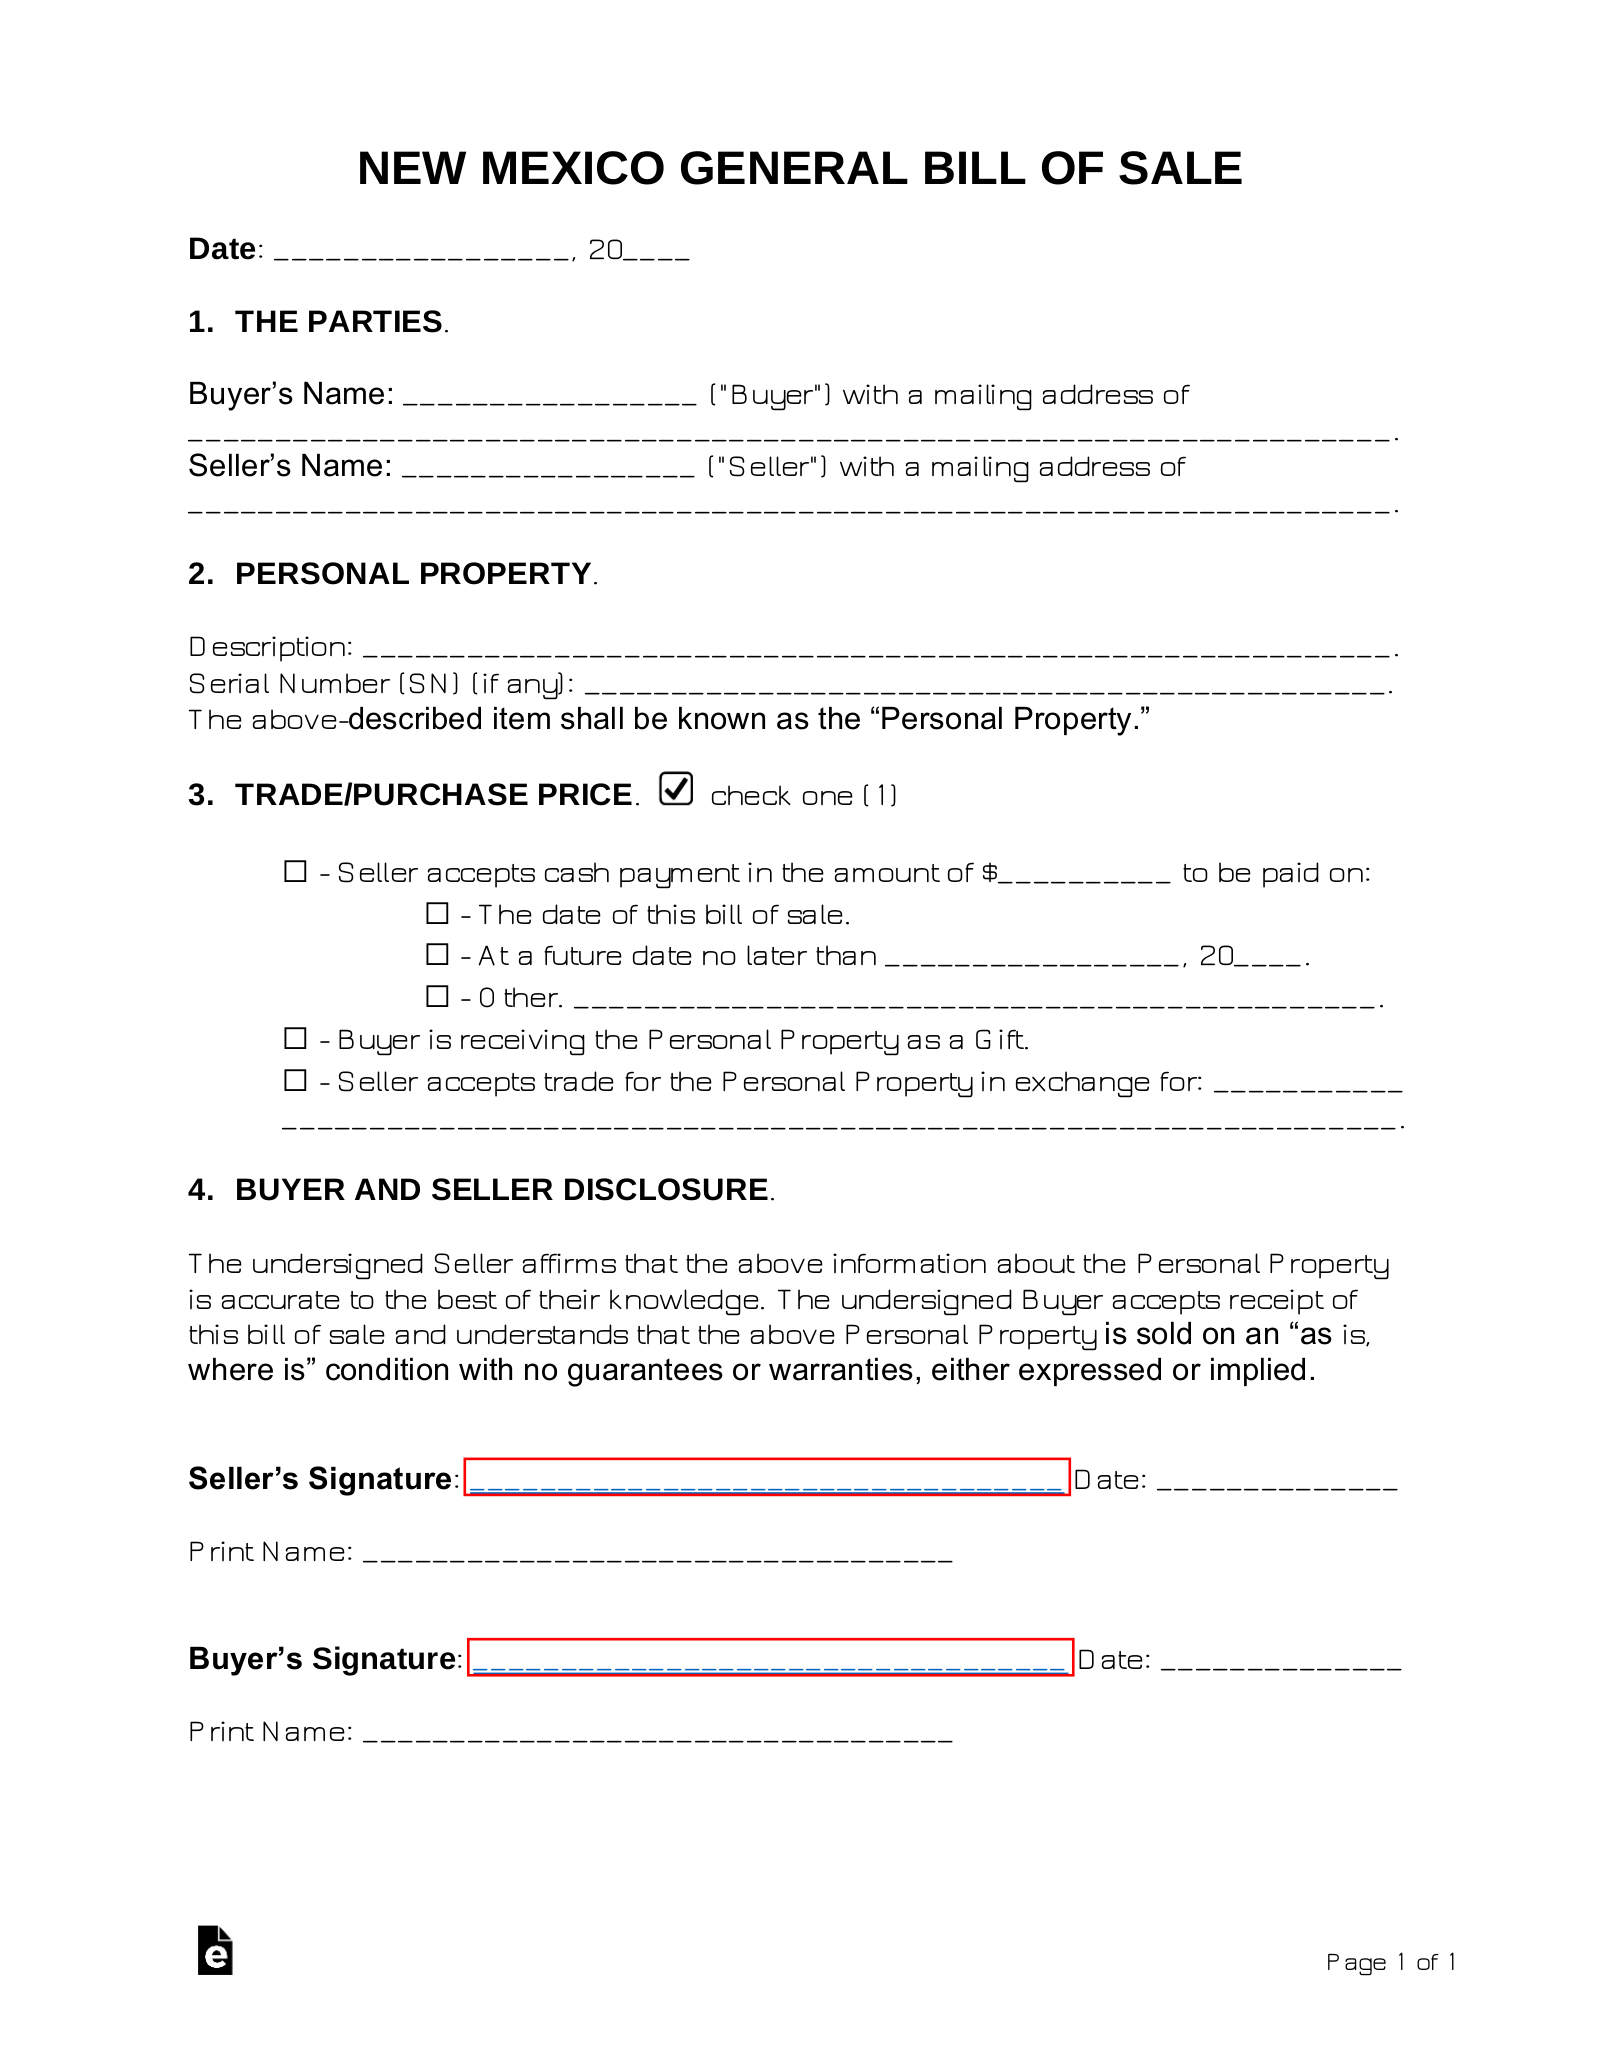 New Mexico General Bill of Sale Form